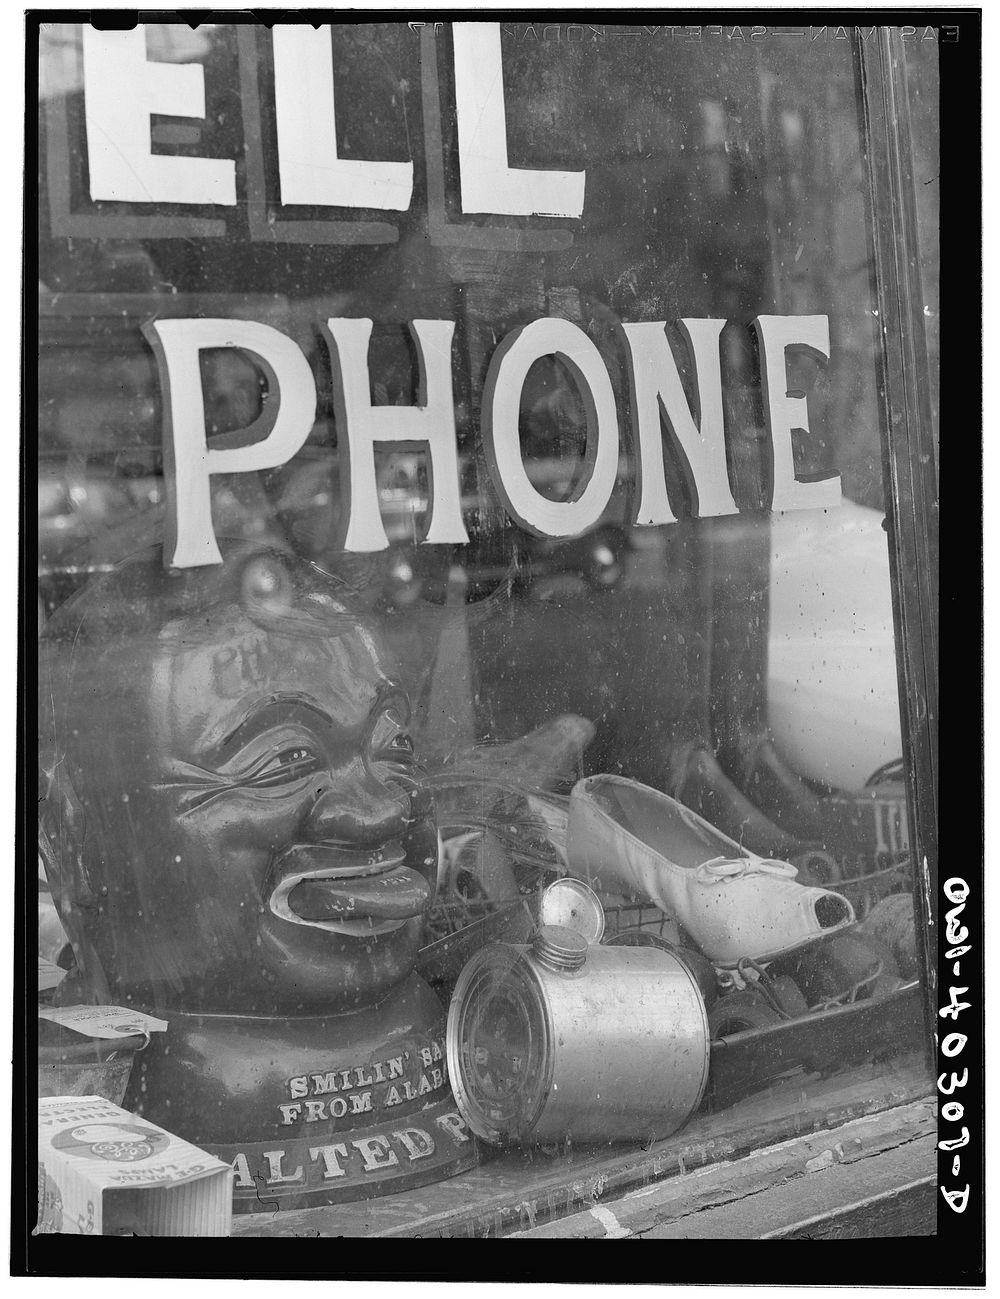 [Untitled photo, possibly related to: Washington, D.C. A pawnshop window]. Sourced from the Library of Congress.